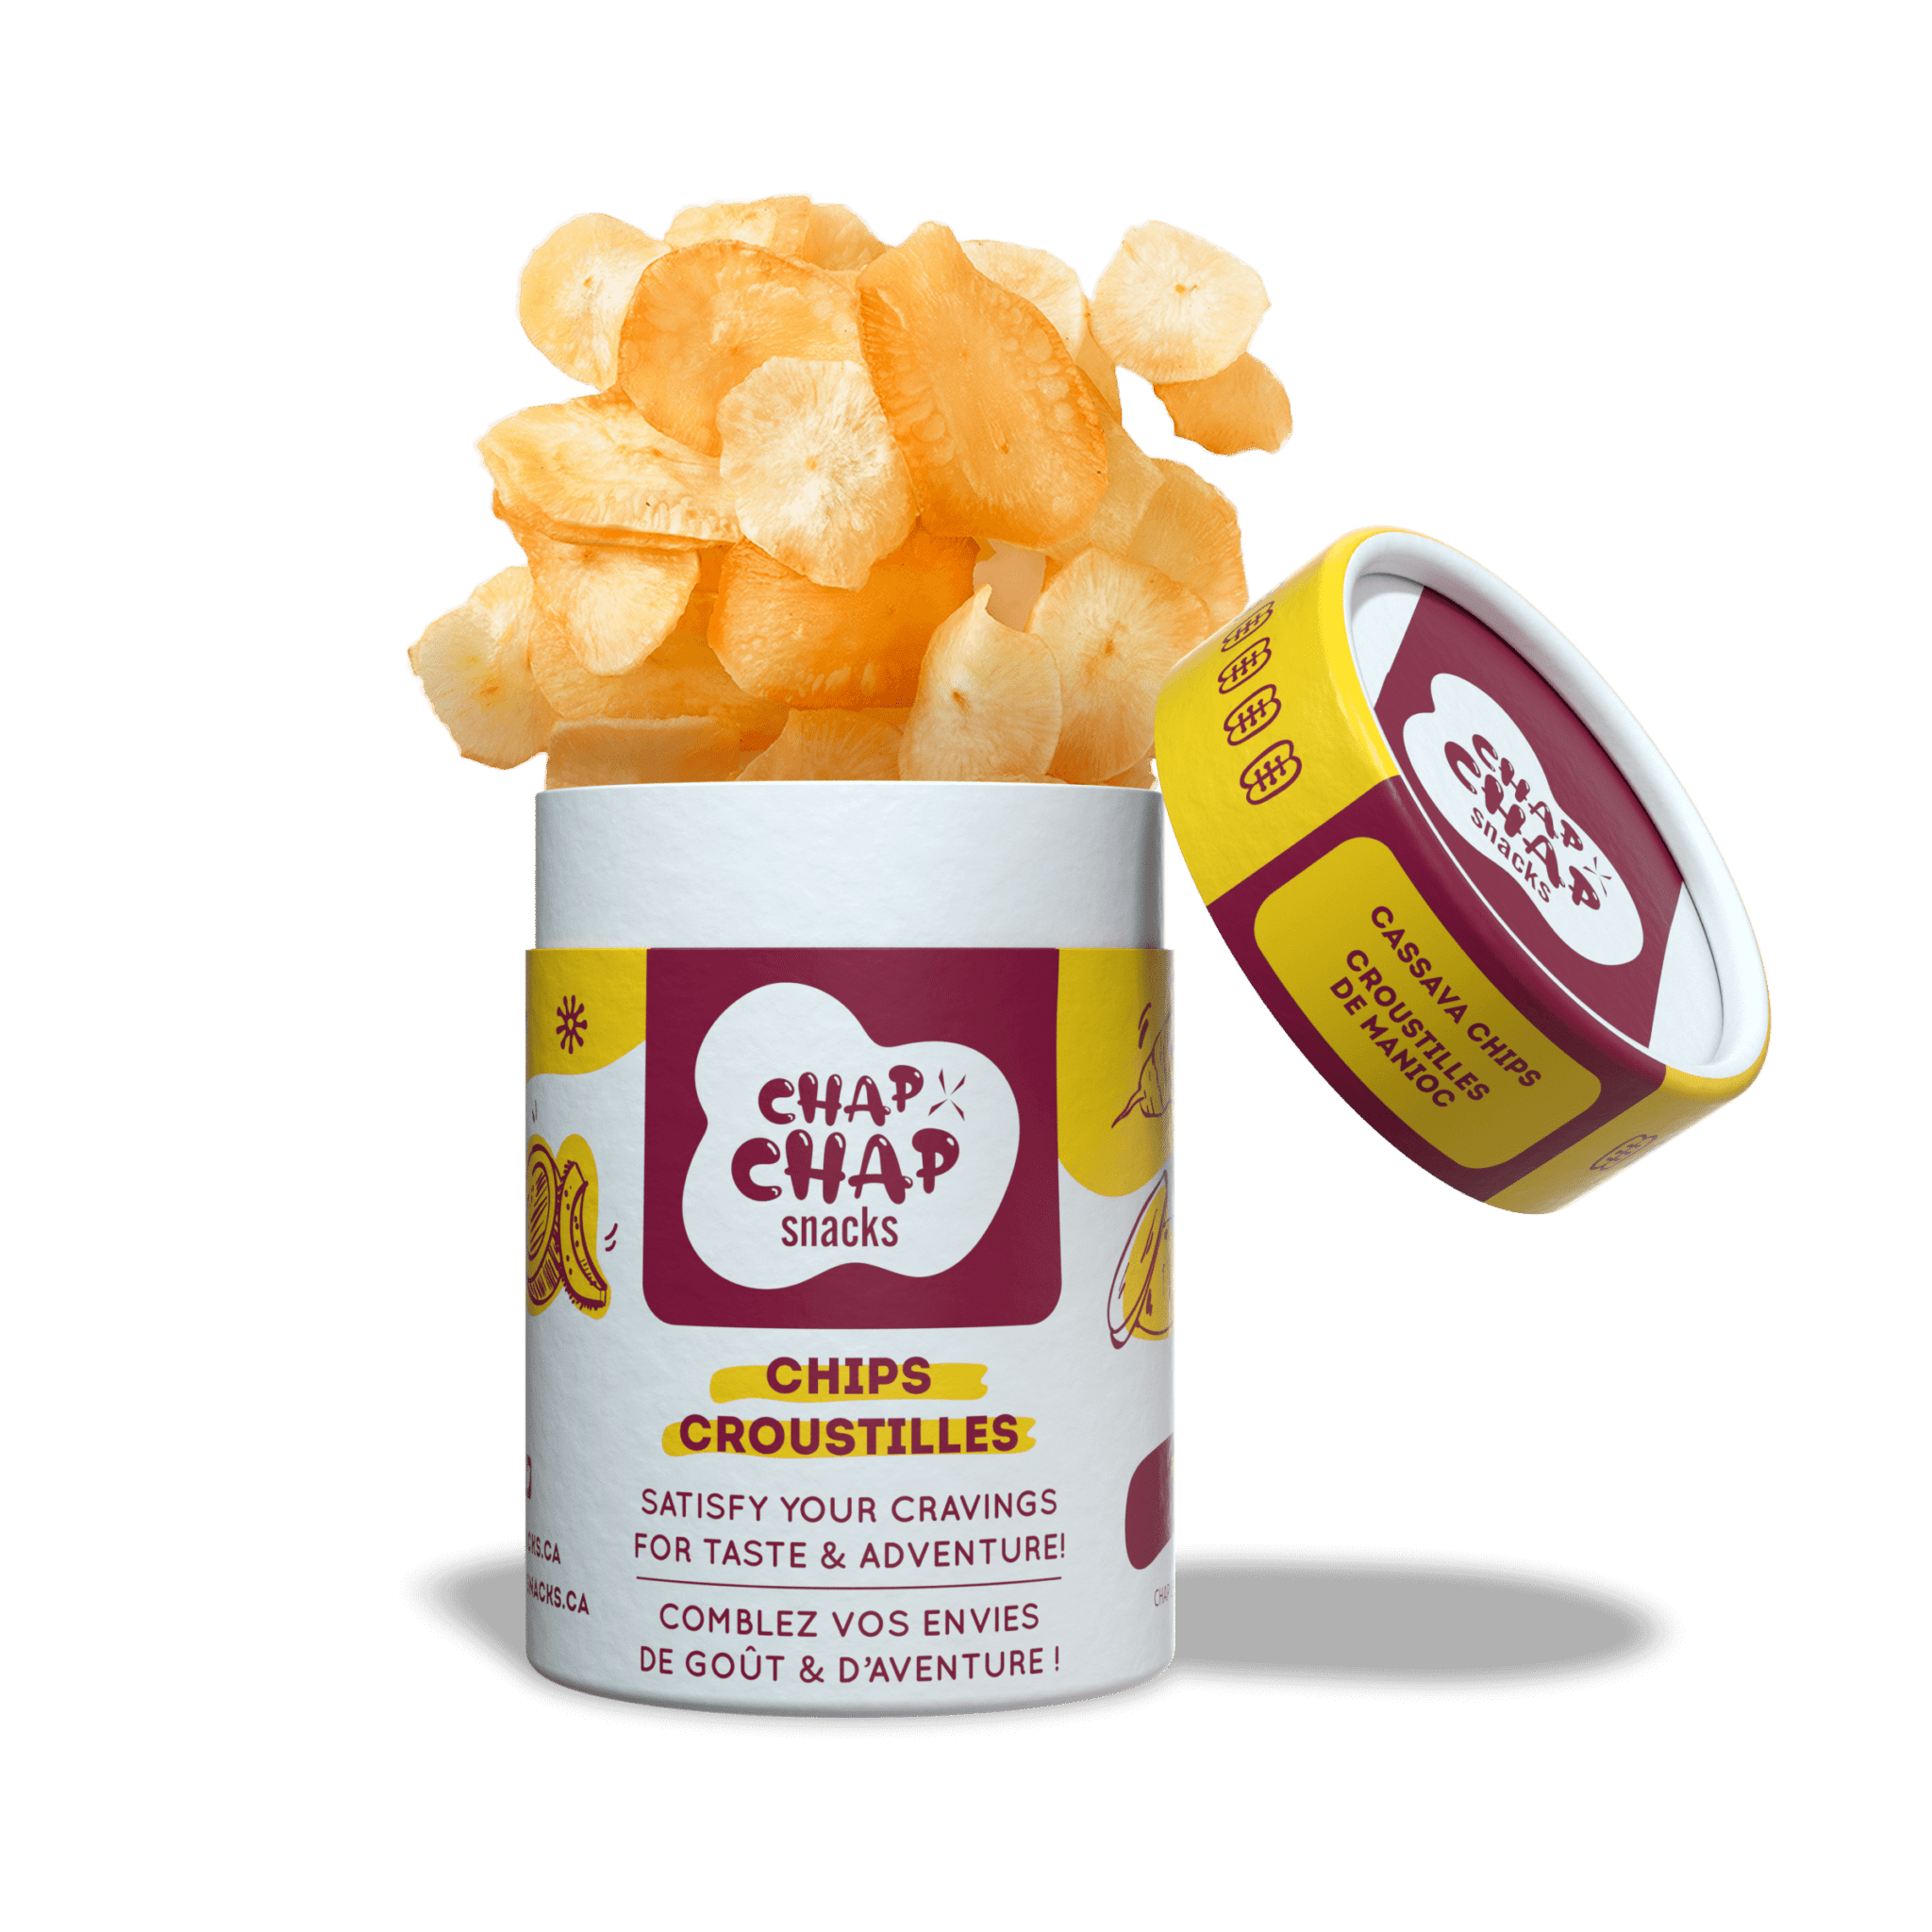 Cassava Chips by Chap Chap Snacks